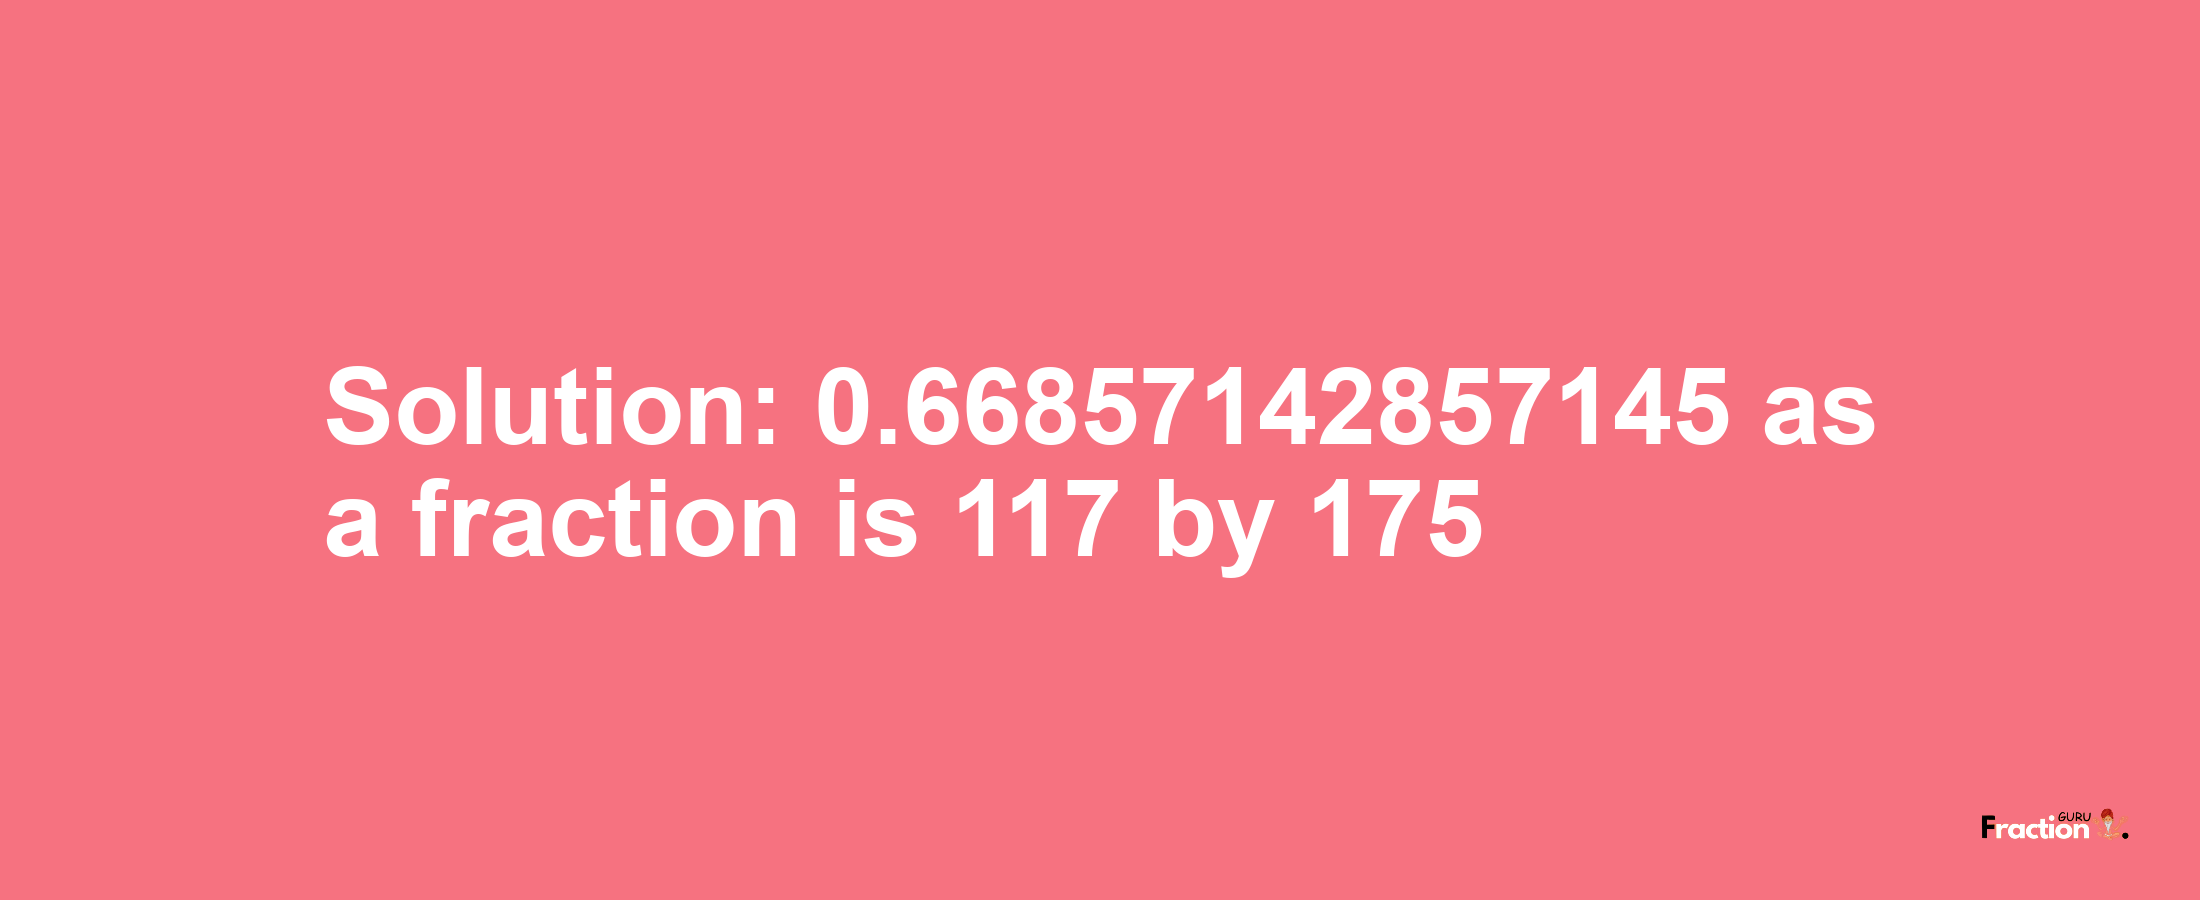 Solution:0.66857142857145 as a fraction is 117/175